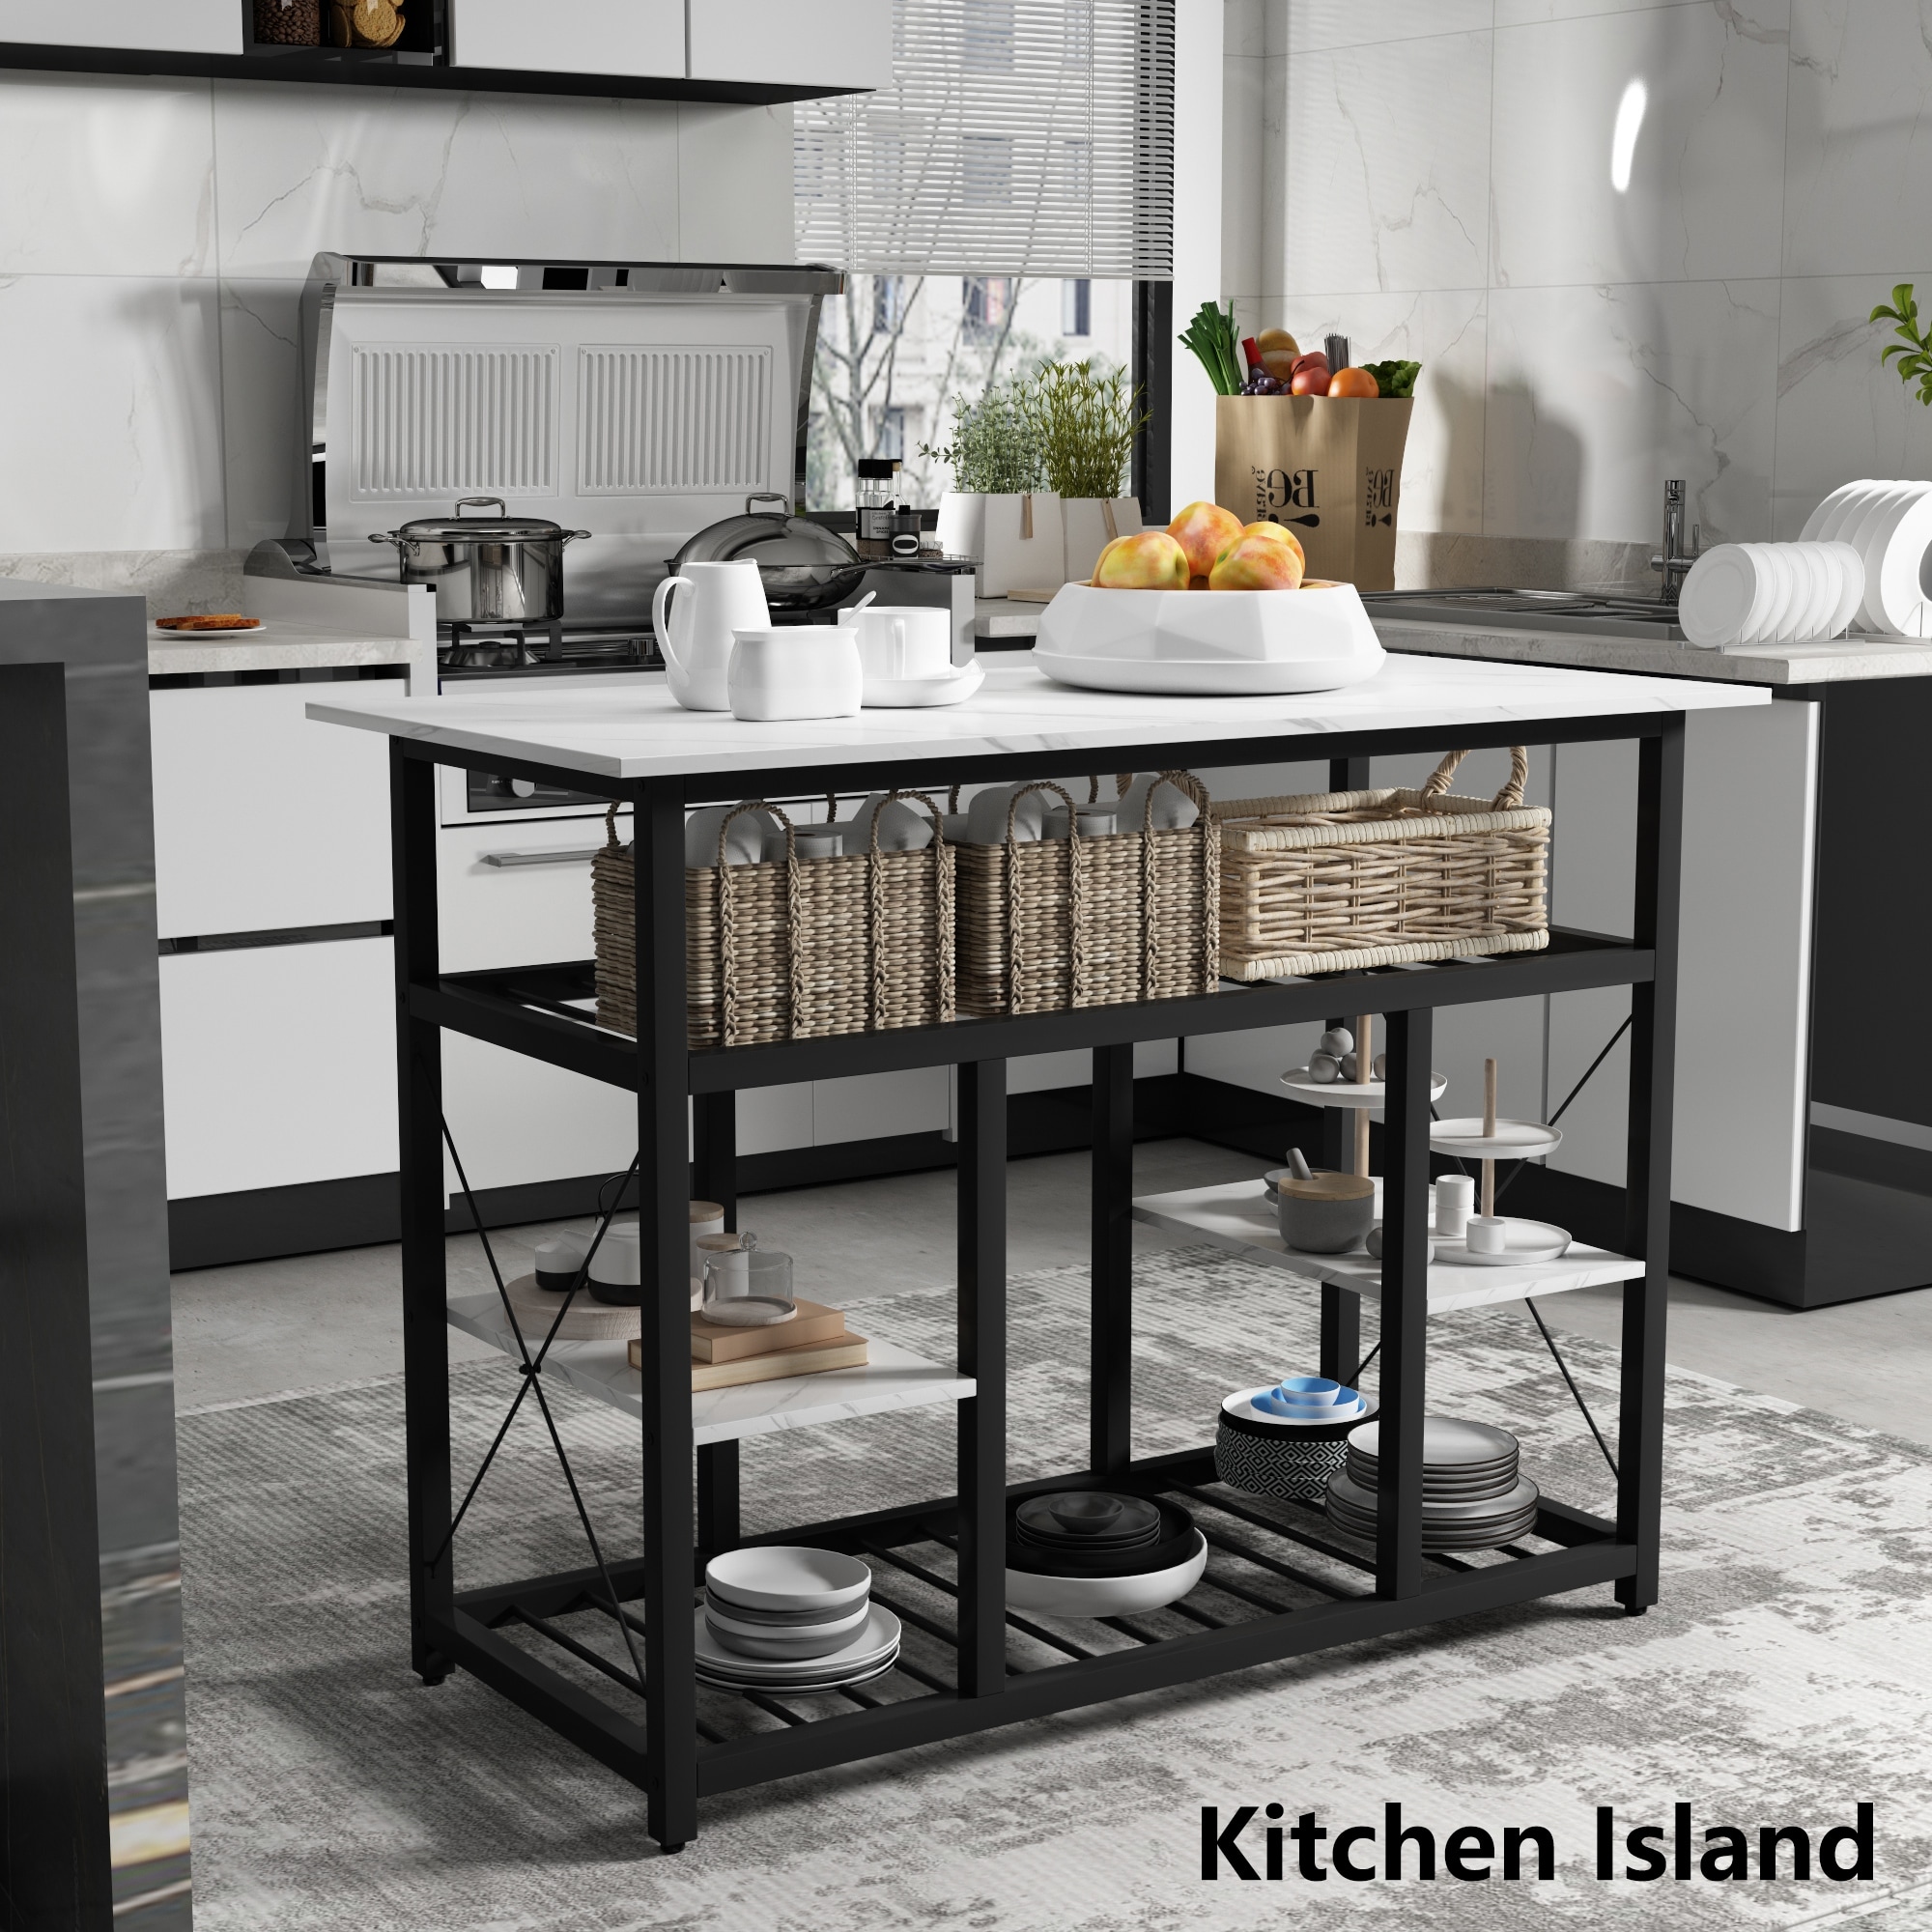 https://ak1.ostkcdn.com/images/products/is/images/direct/8c6a0b7f716e7f3cdd7018c1046bffad1a399c24/Multifunctional-Large-Worktop-Kitchen-Island-With-4-Open-Shelves%2CFaux-Marble-Tabletop.jpg